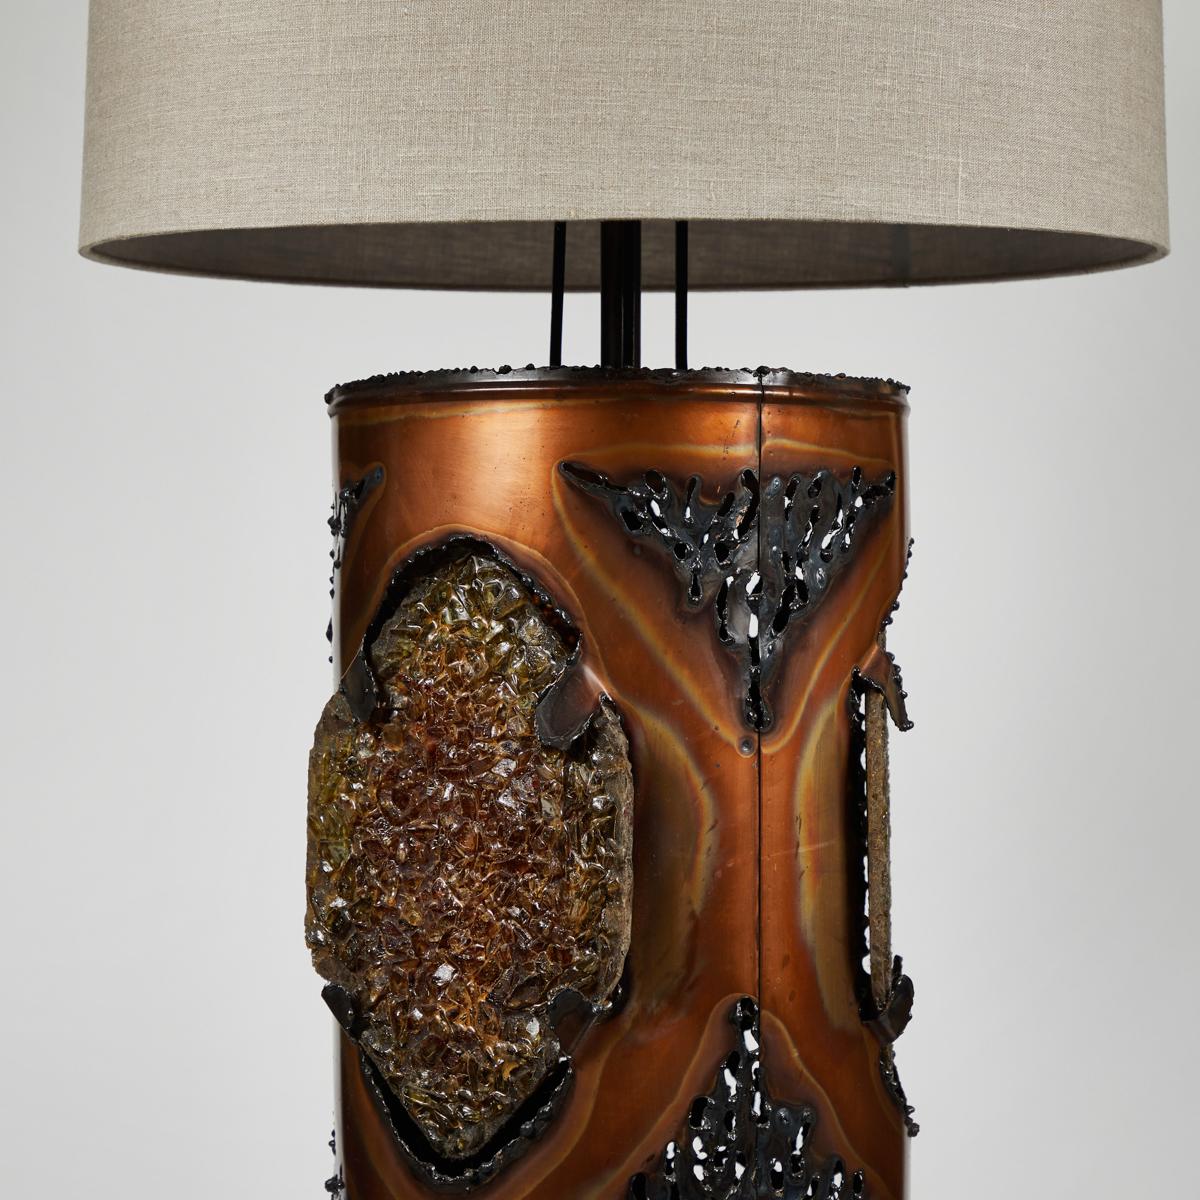 French mid-century copper tole floor lamp with irregular geode-like panels, columnar base, and custom cream linen drum shade. The piece has a strong yet warm presence, and a uniquely mineral quality. 

France, circa 1950

Dimensions: 22W x 22D x 58H